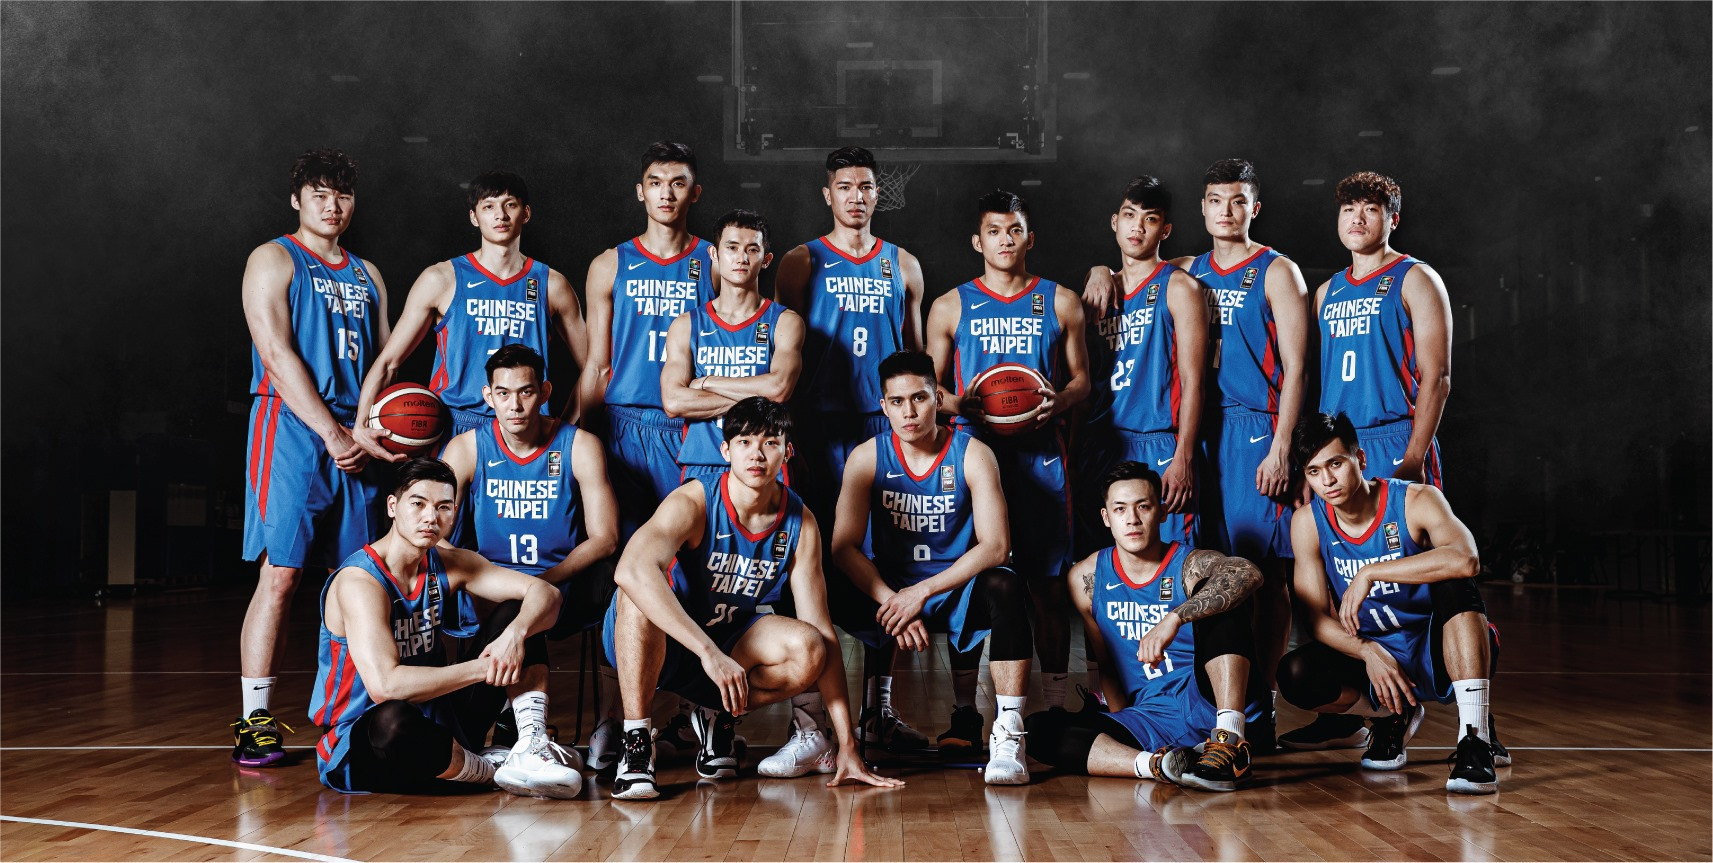 Chinese Taipei refuse to compete at Paris 2024 pre-qualifier due to Syrian civil war